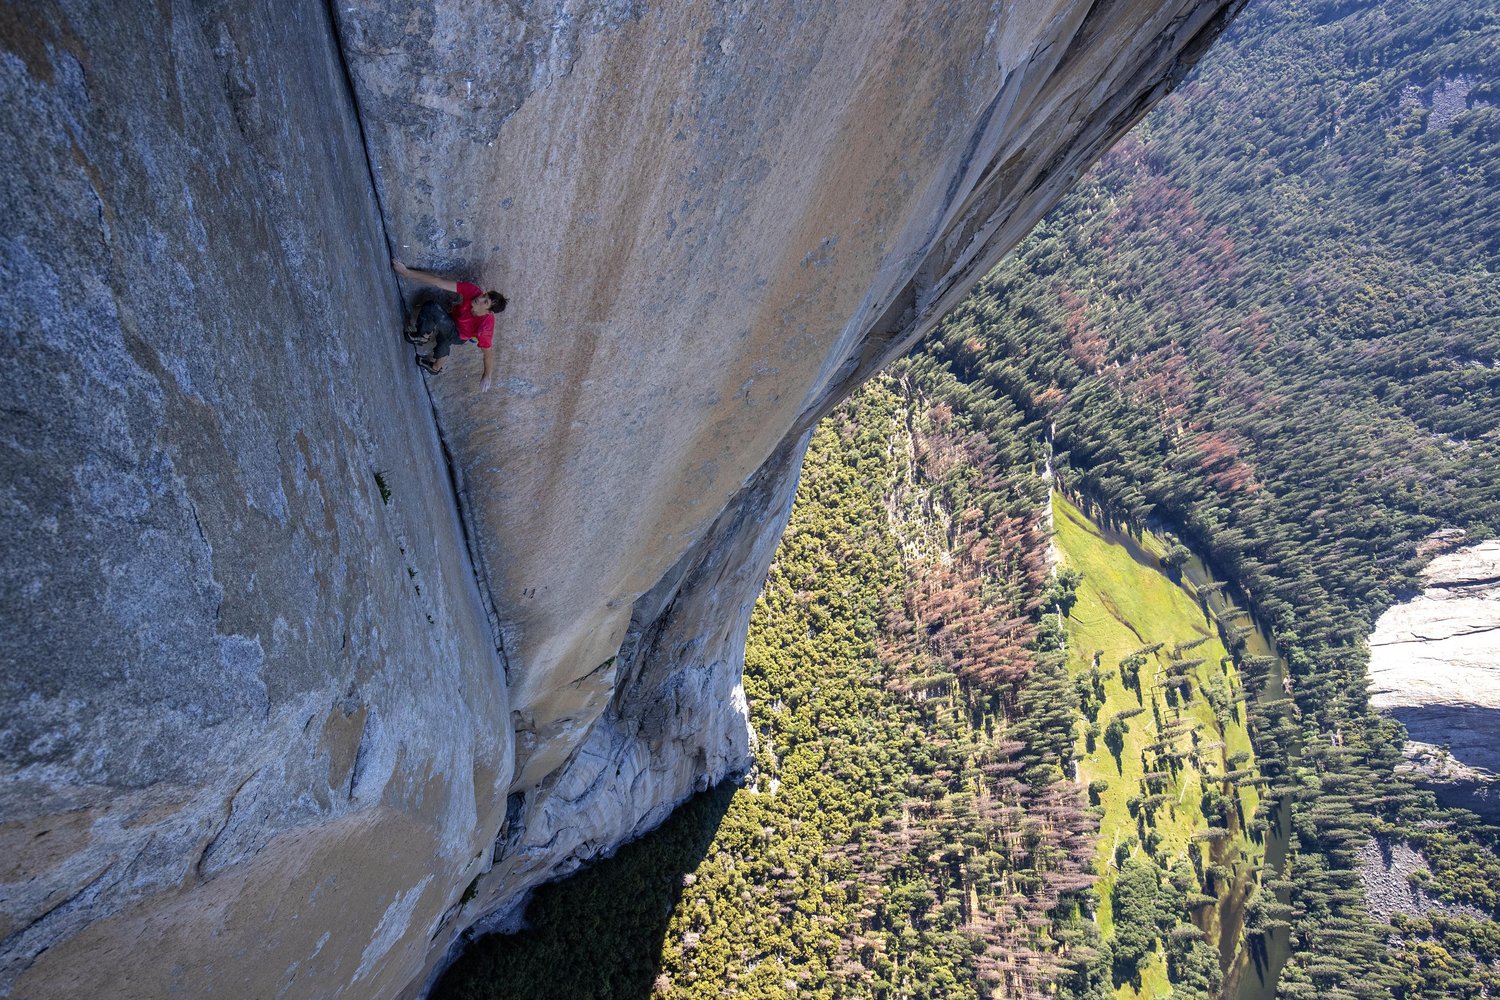 Free Solo Movie Review